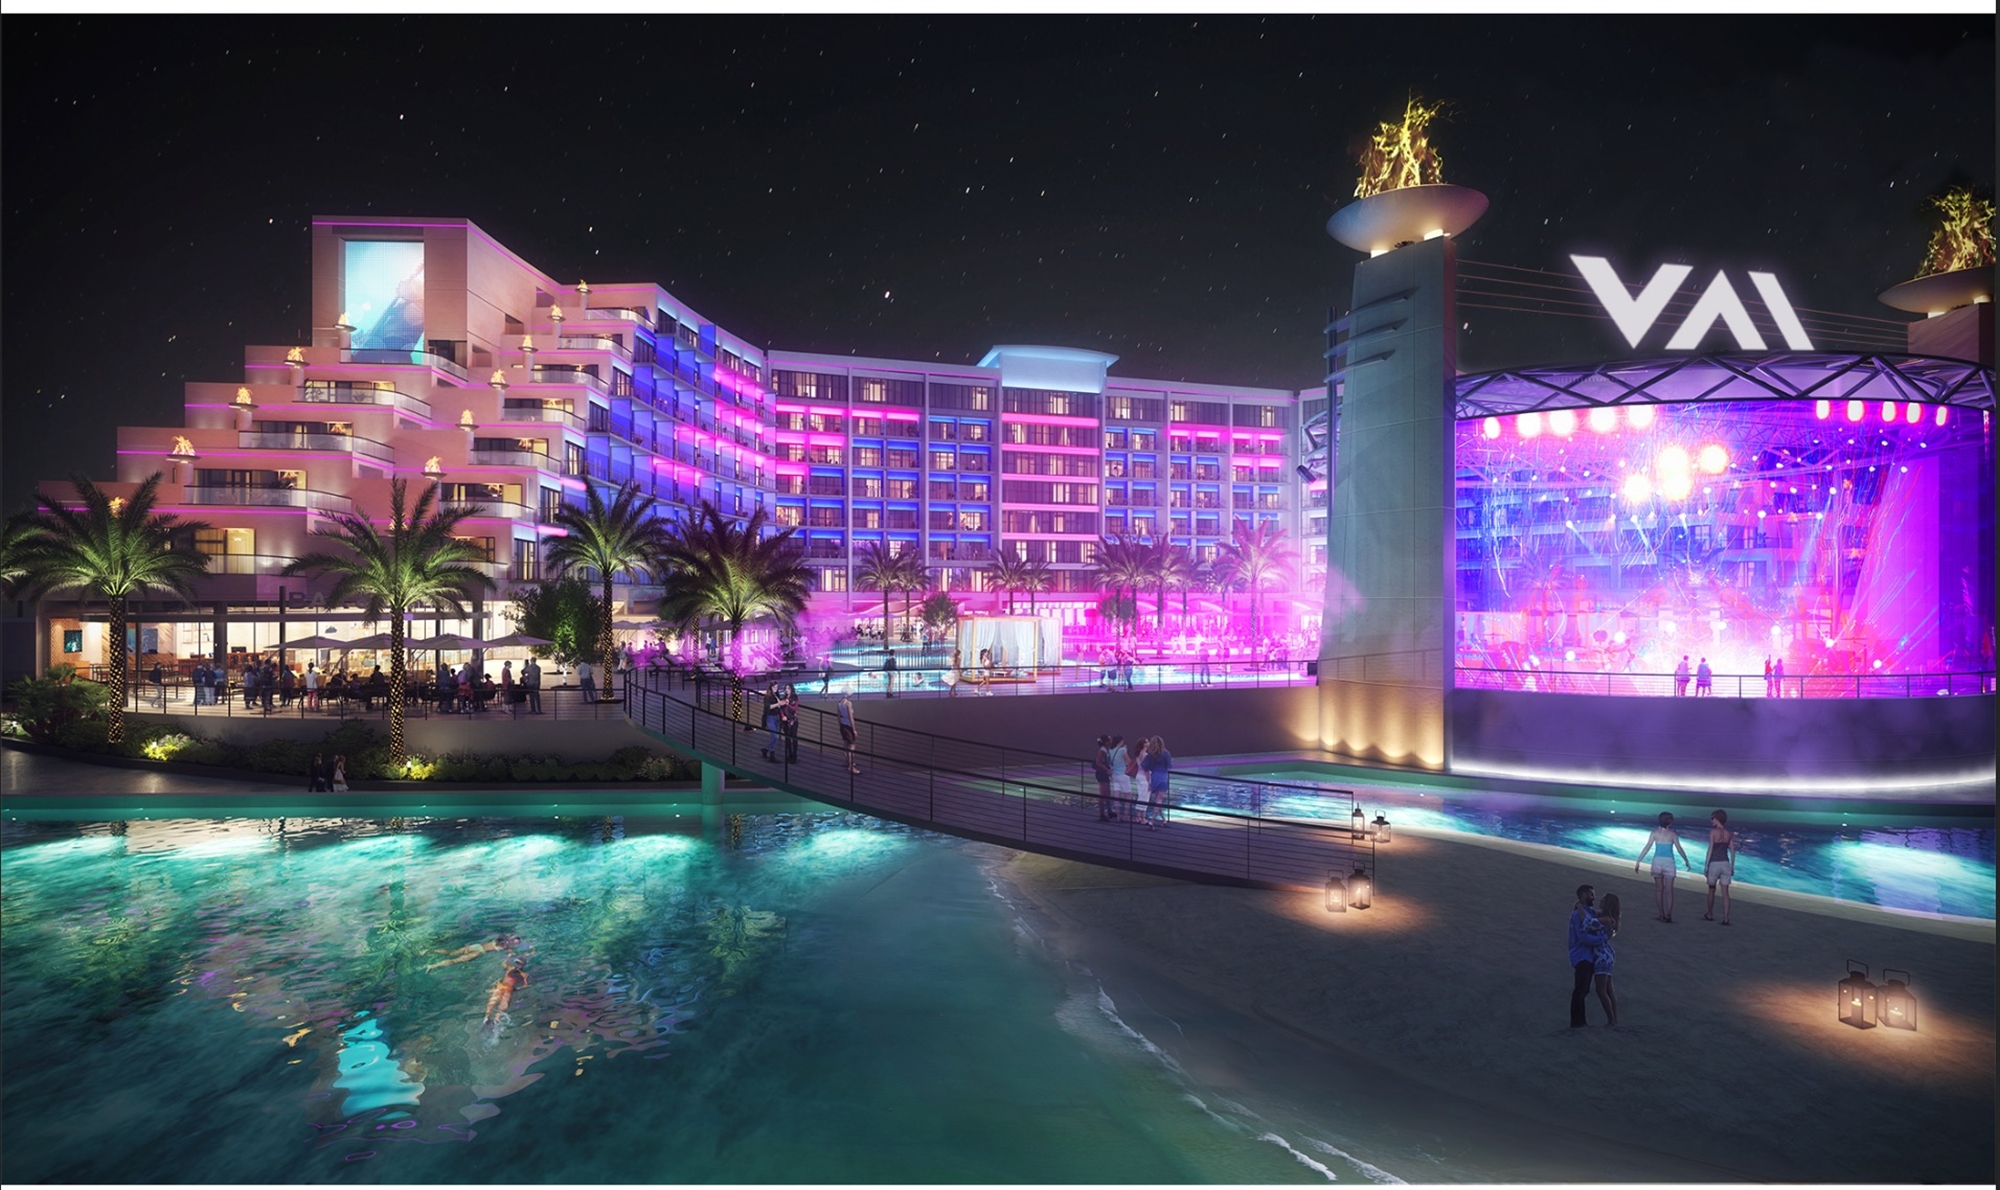 LARGEST HOTEL IN ARIZONA SET TO OPEN IN GLENDALE IN LATE SPRING 2023